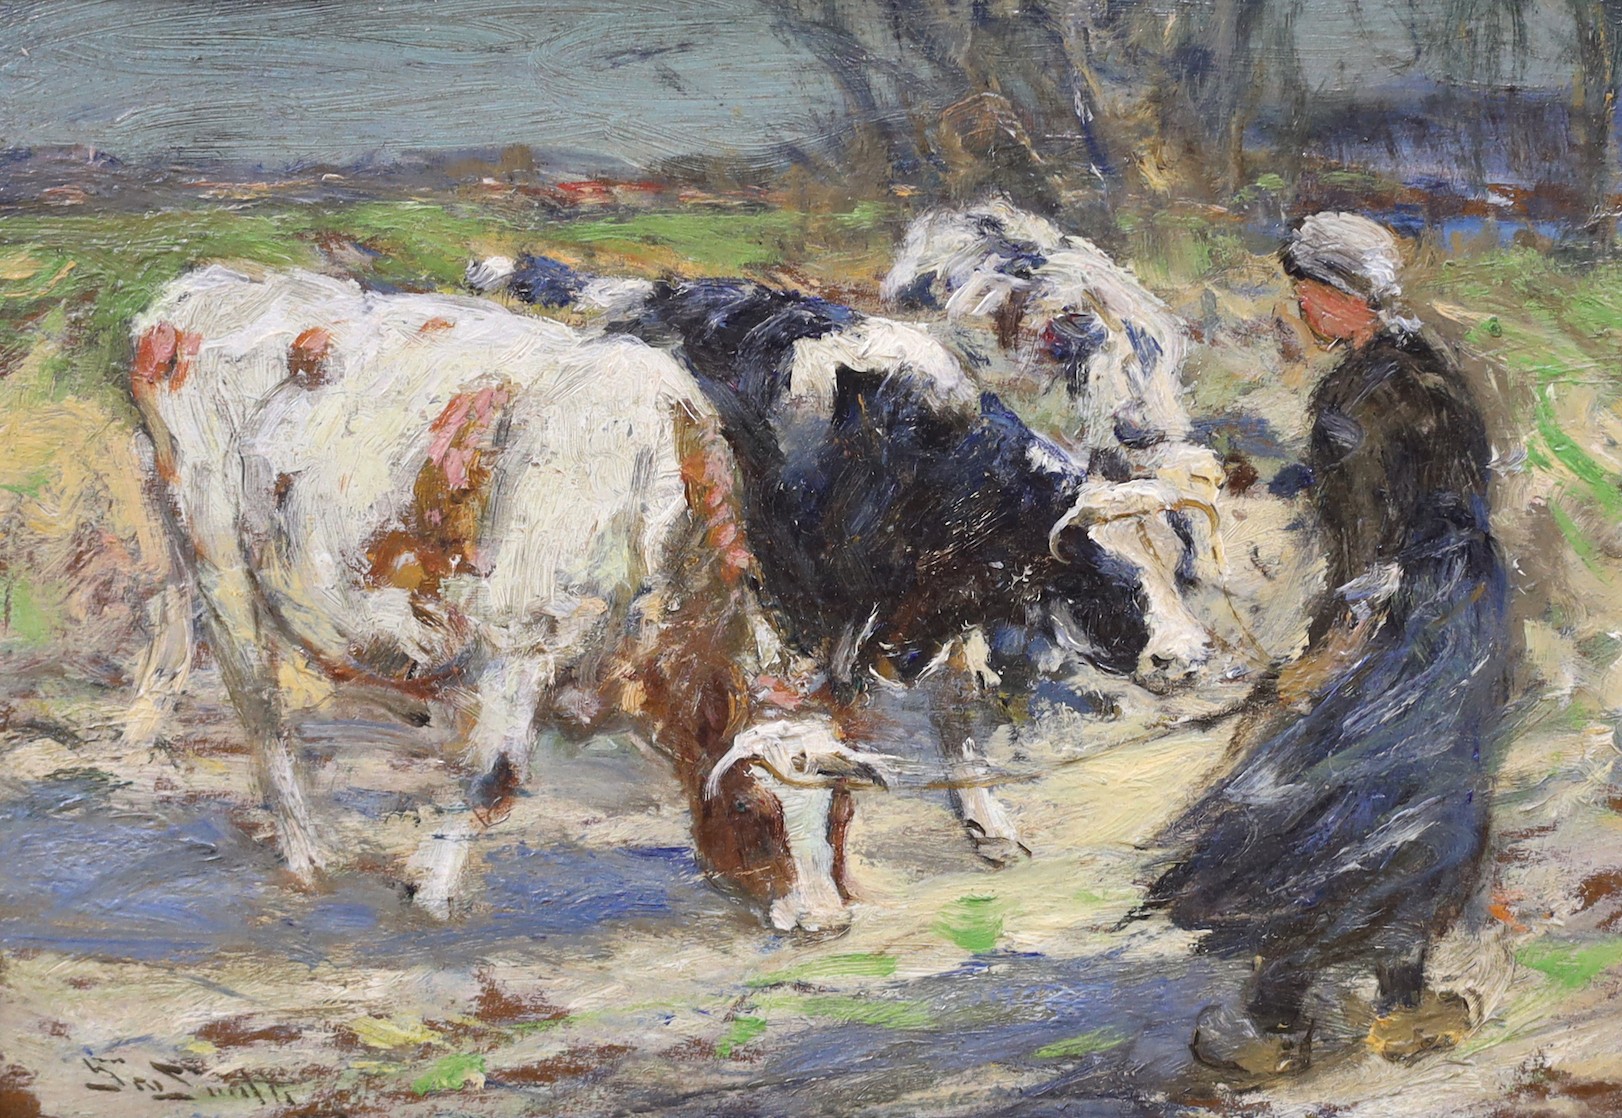 George Smith (1870-1934), oil on wooden panel, Cowherd and cattle, signed, 17 x 24cm